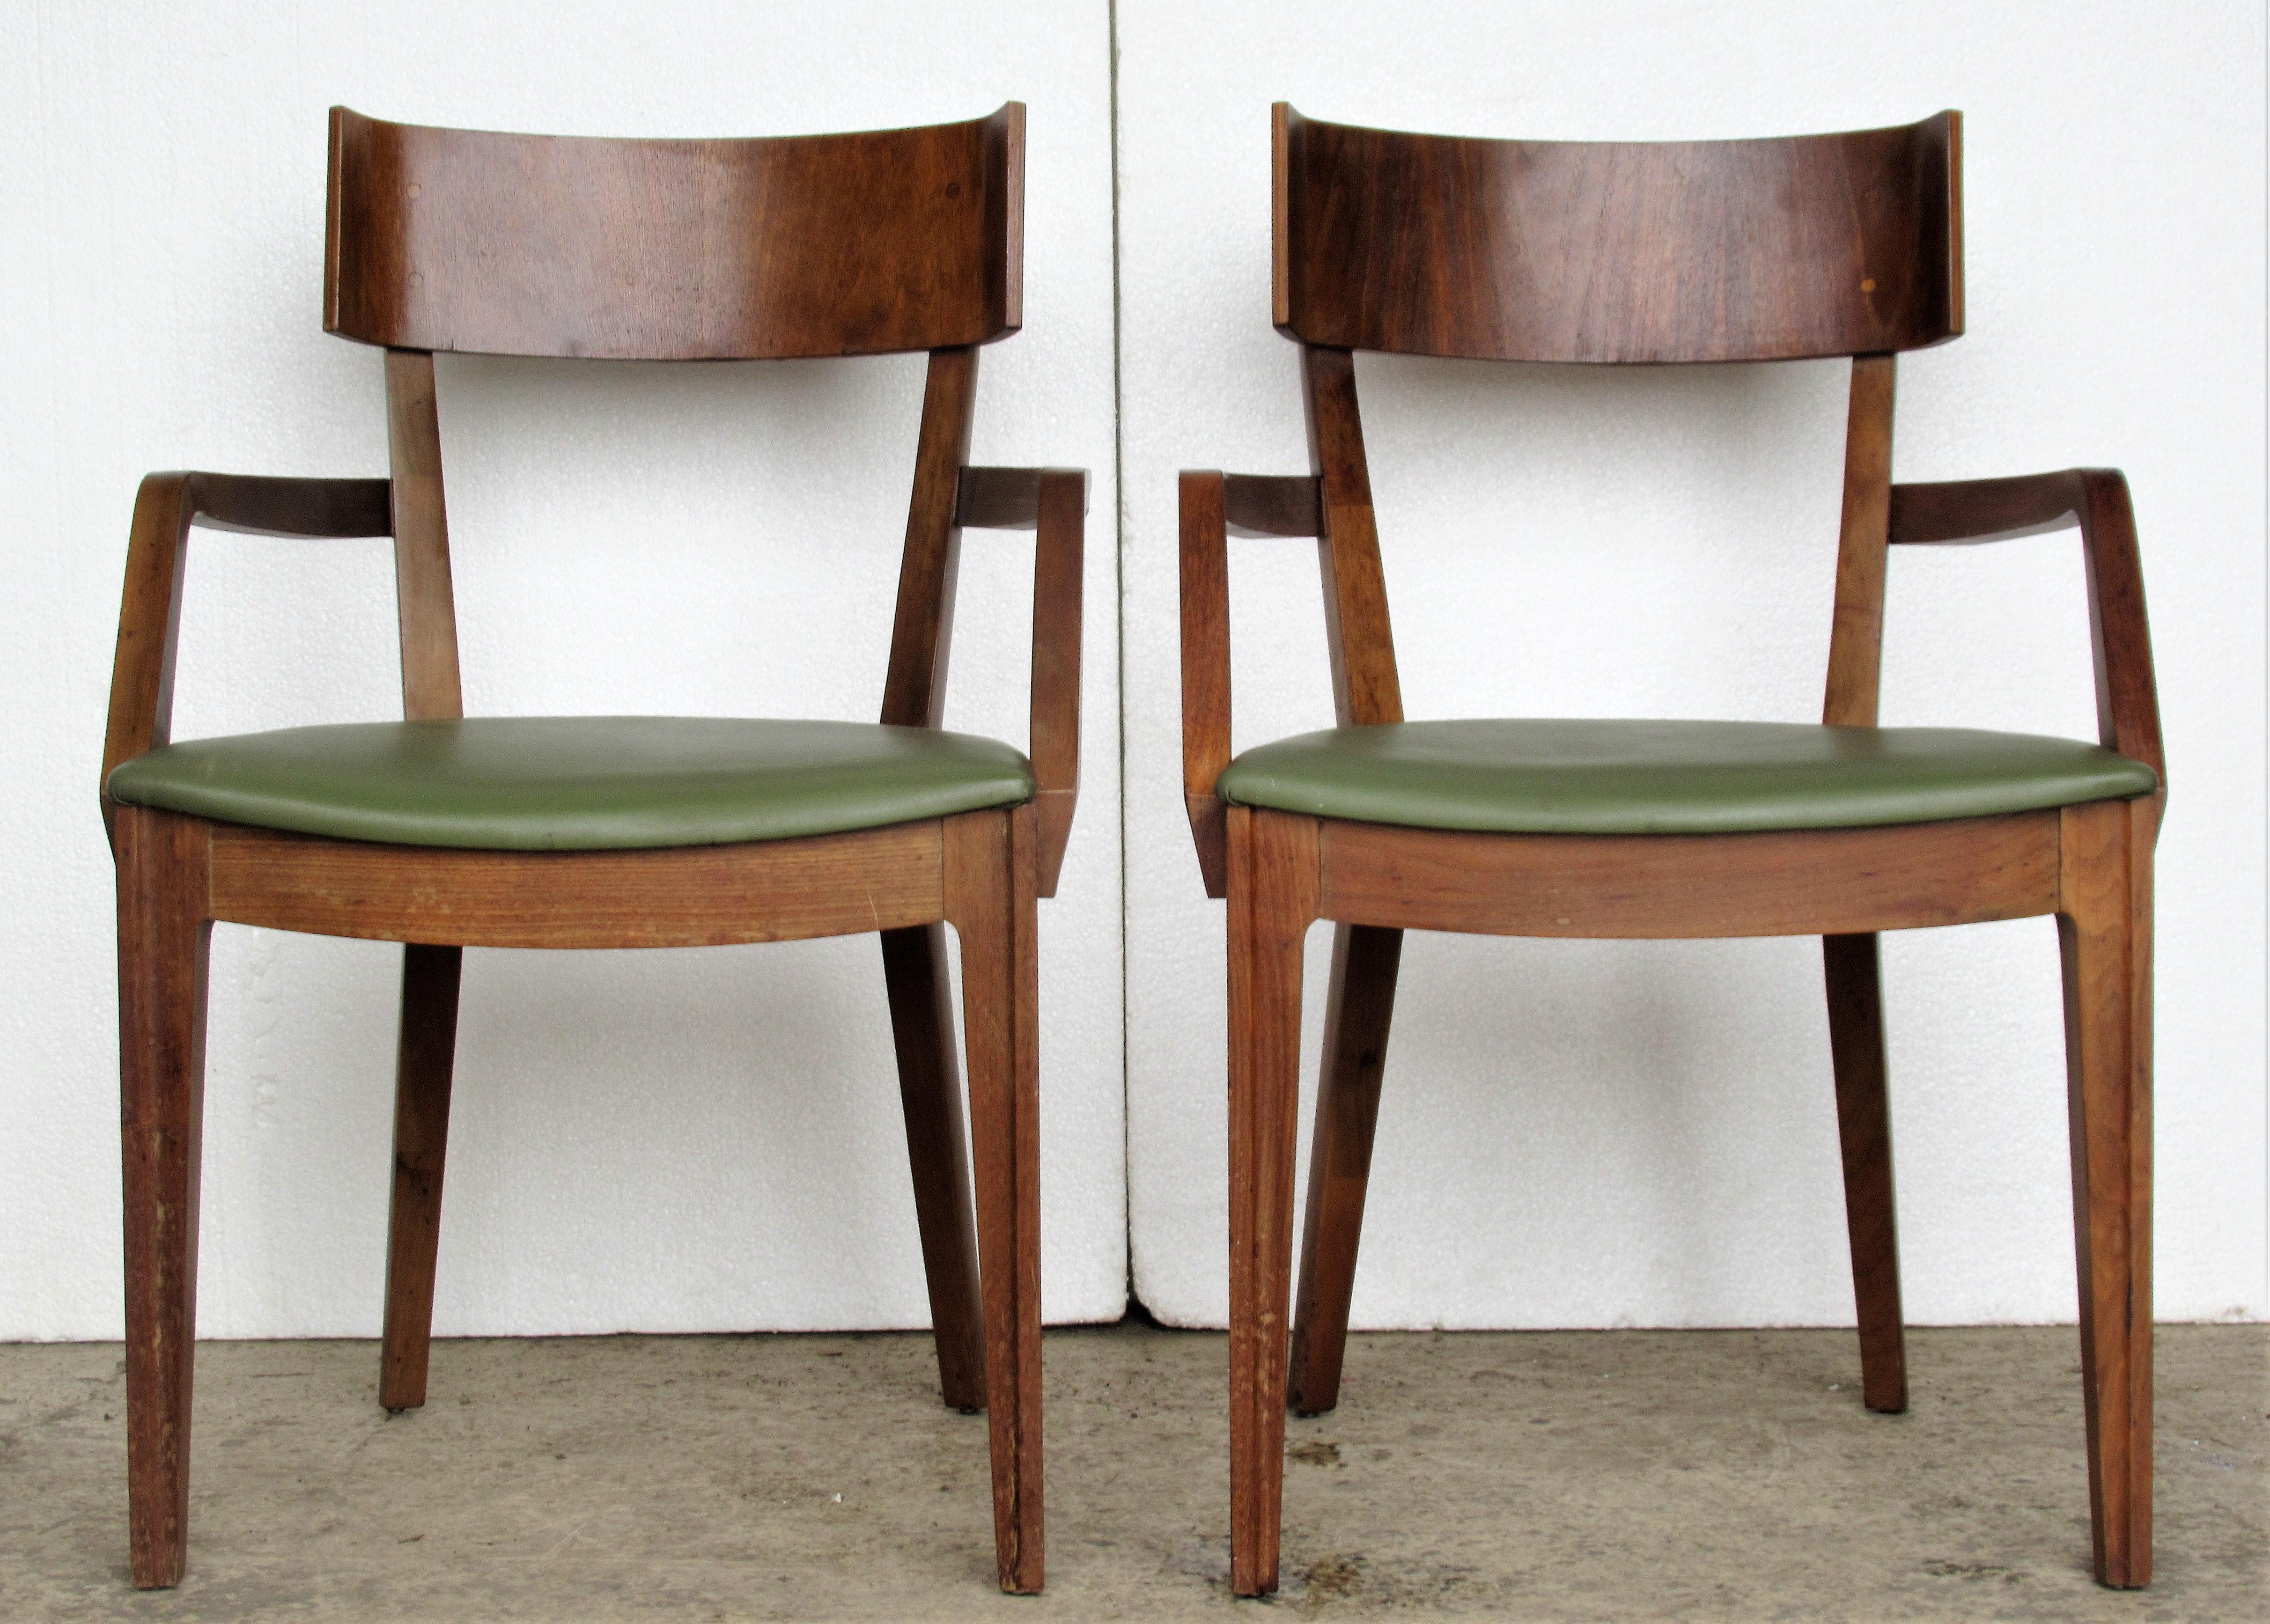 Pair of modernist design Drexel walnut armchairs dining chairs with beautifully curved bent laminated figured walnut veneer backs and overall pegged construction. Circa 1960. Look at all pictures and read condition report in comment section.